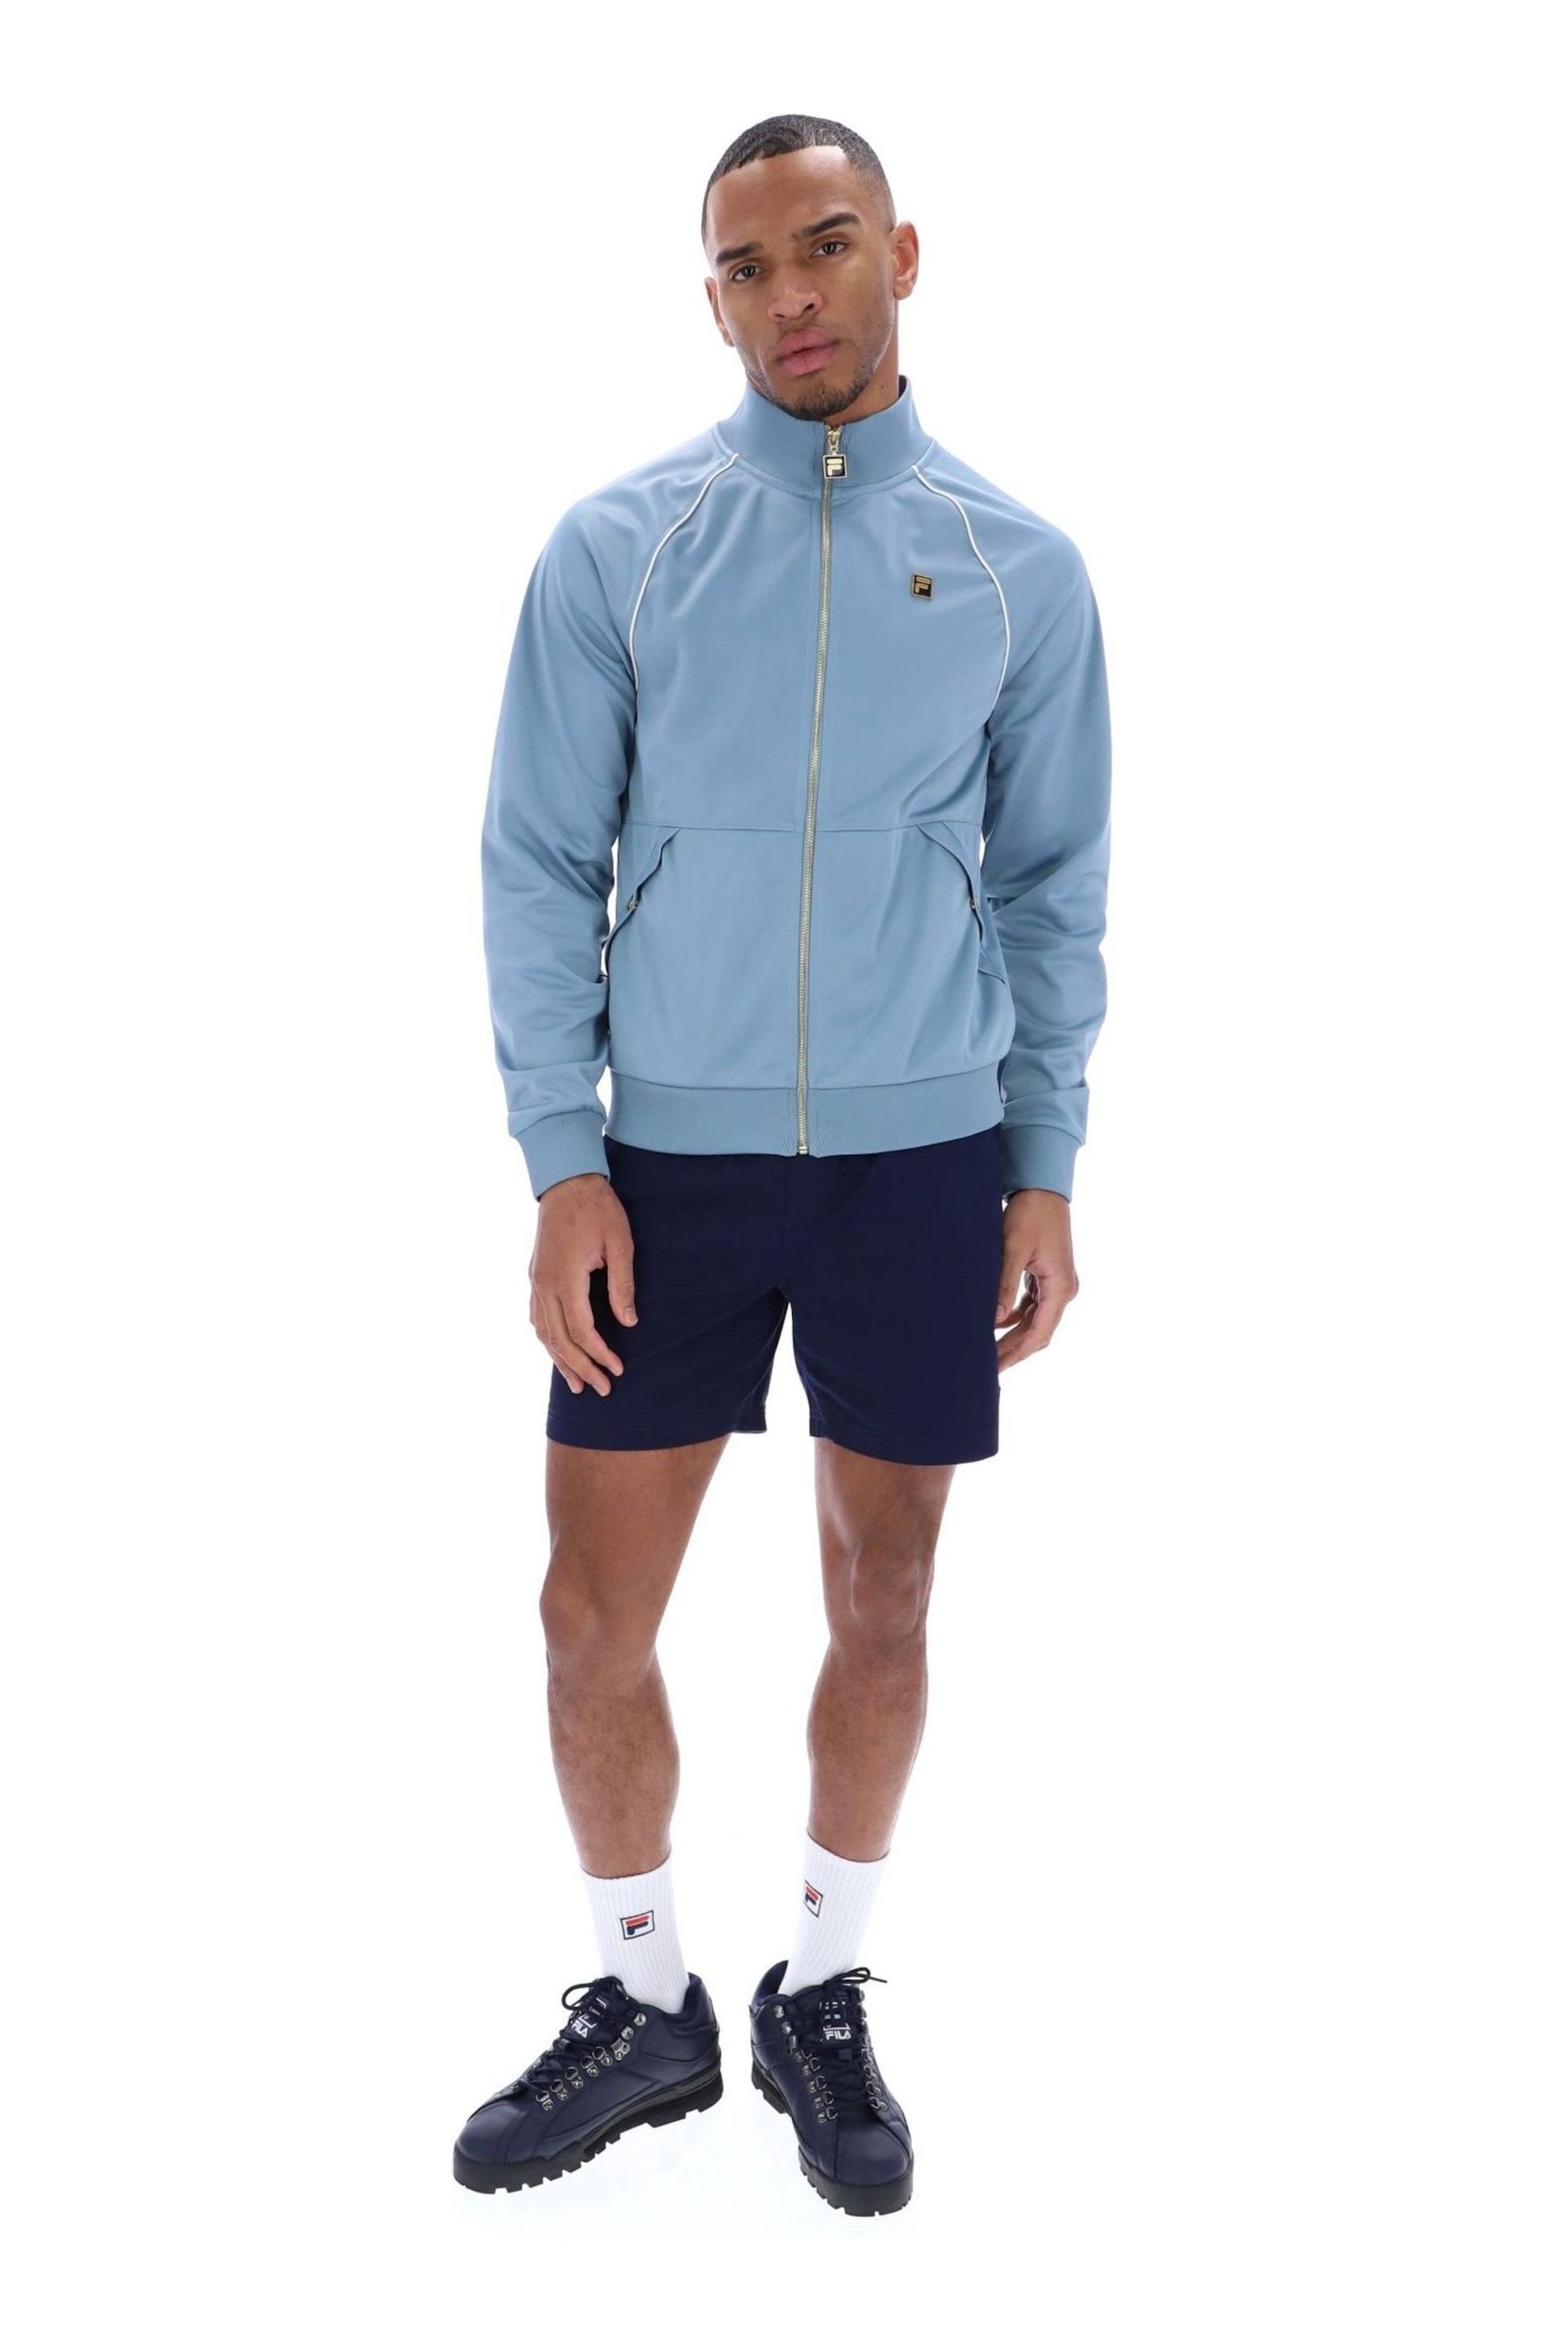 Fila Blue Tristan Track Top With Piping Detail - Image 1 of 4